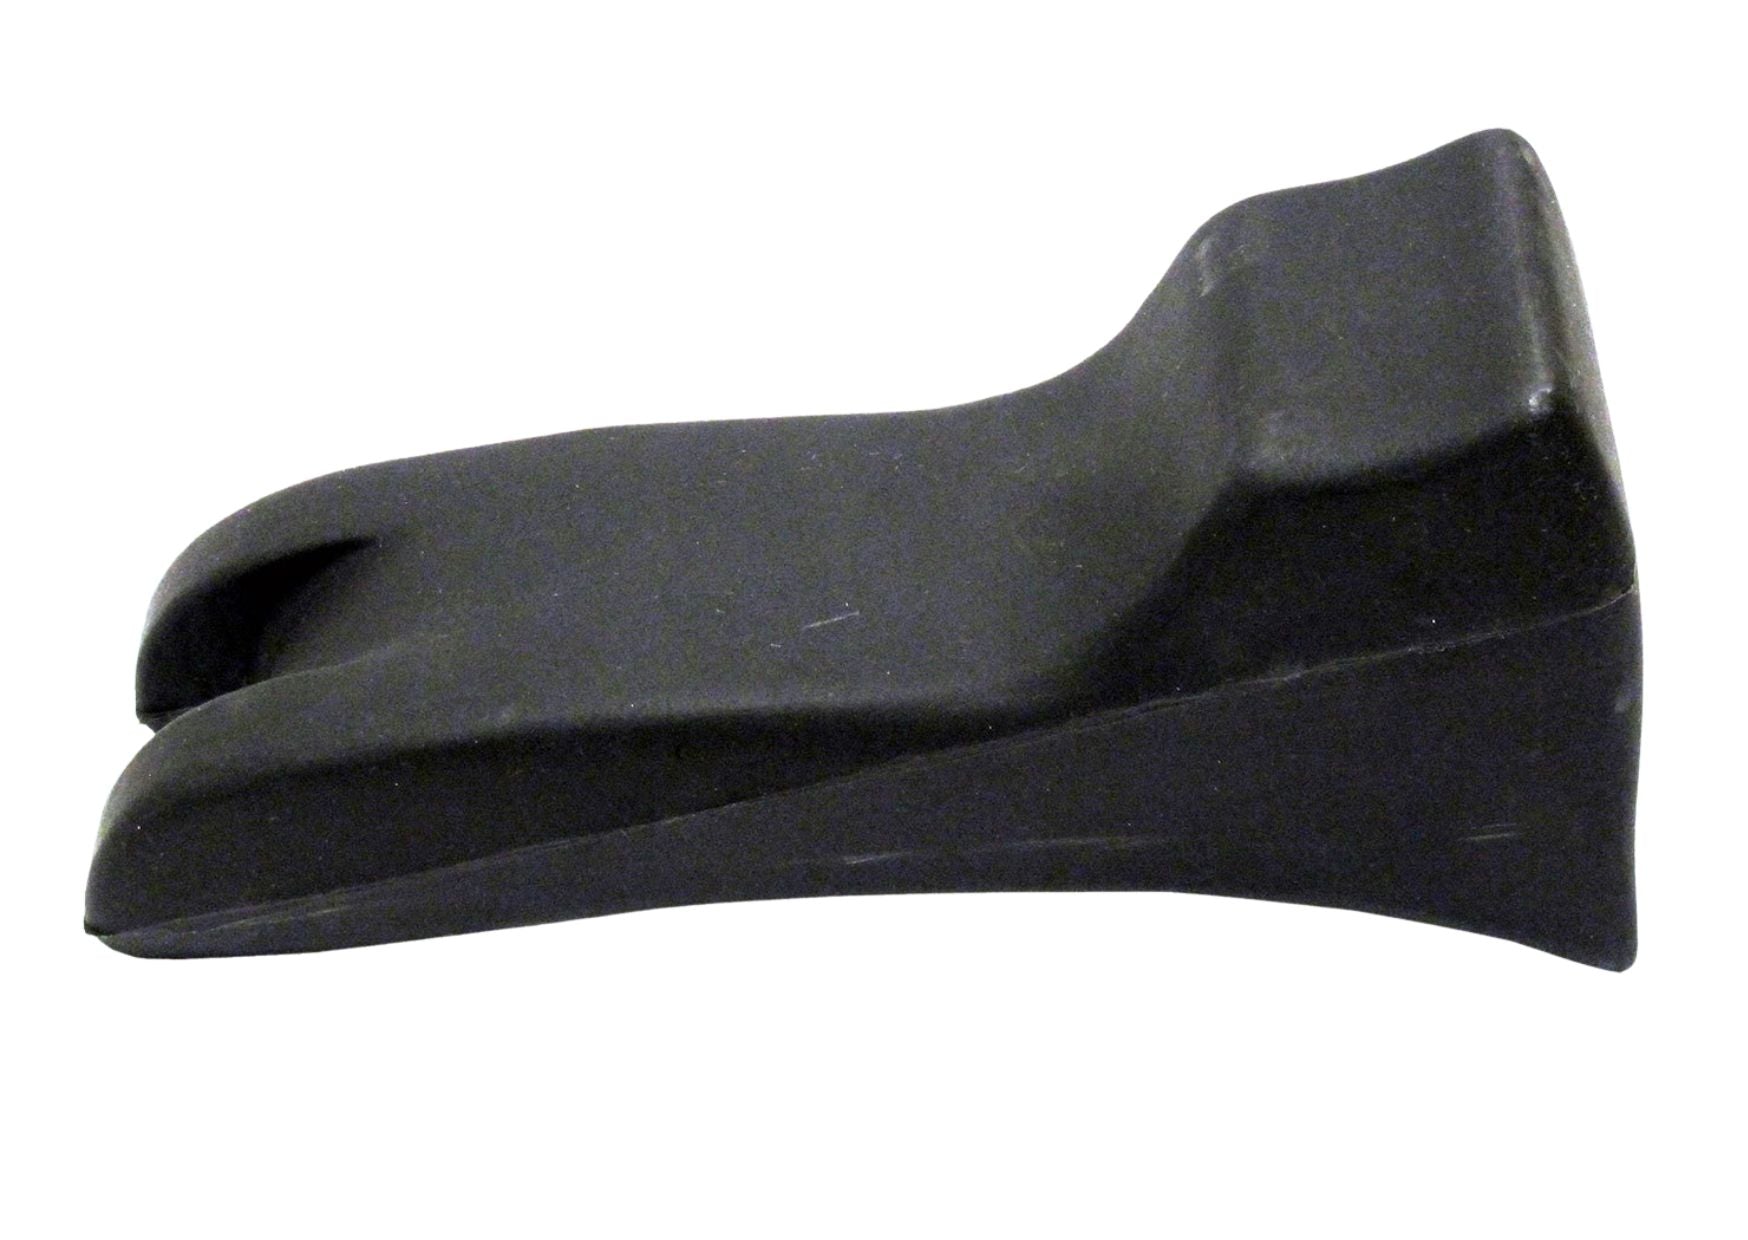 Body support wedge, rubber, black-grey / 2 pieces